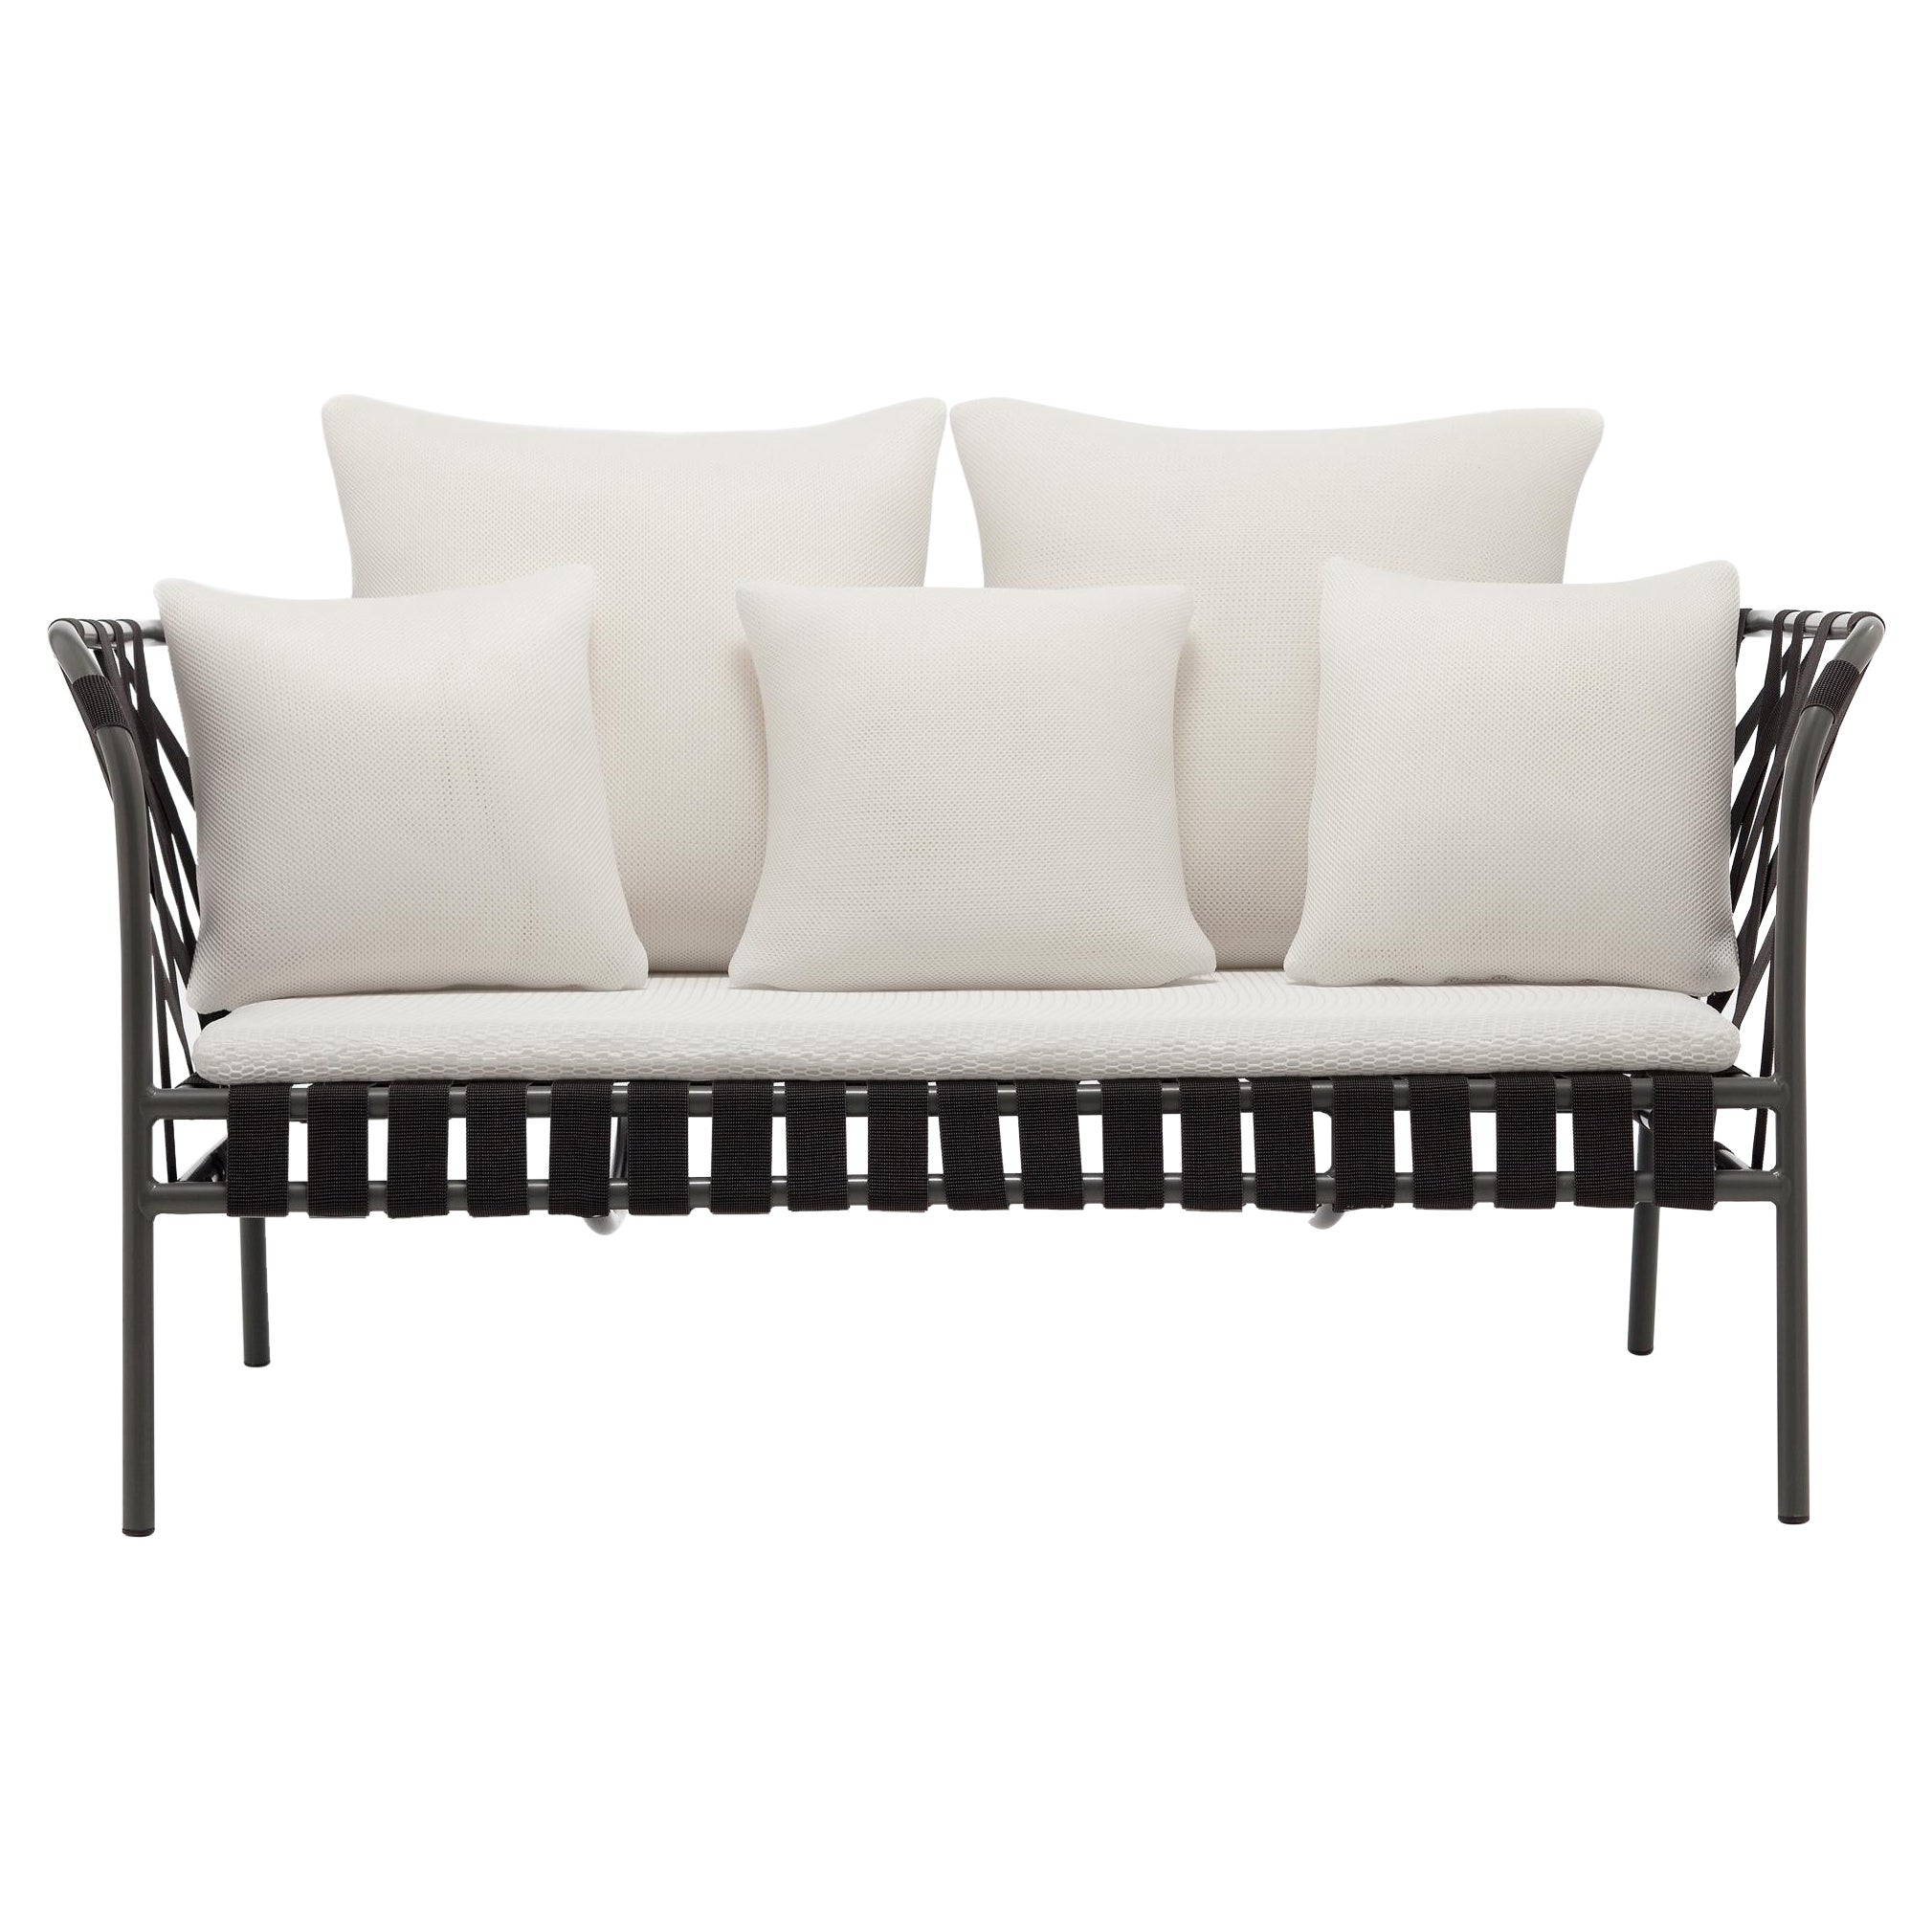 Gervasoni Small Inout Sofa in Aspen 02 Upholstery & Grey Frame with Black Belts For Sale